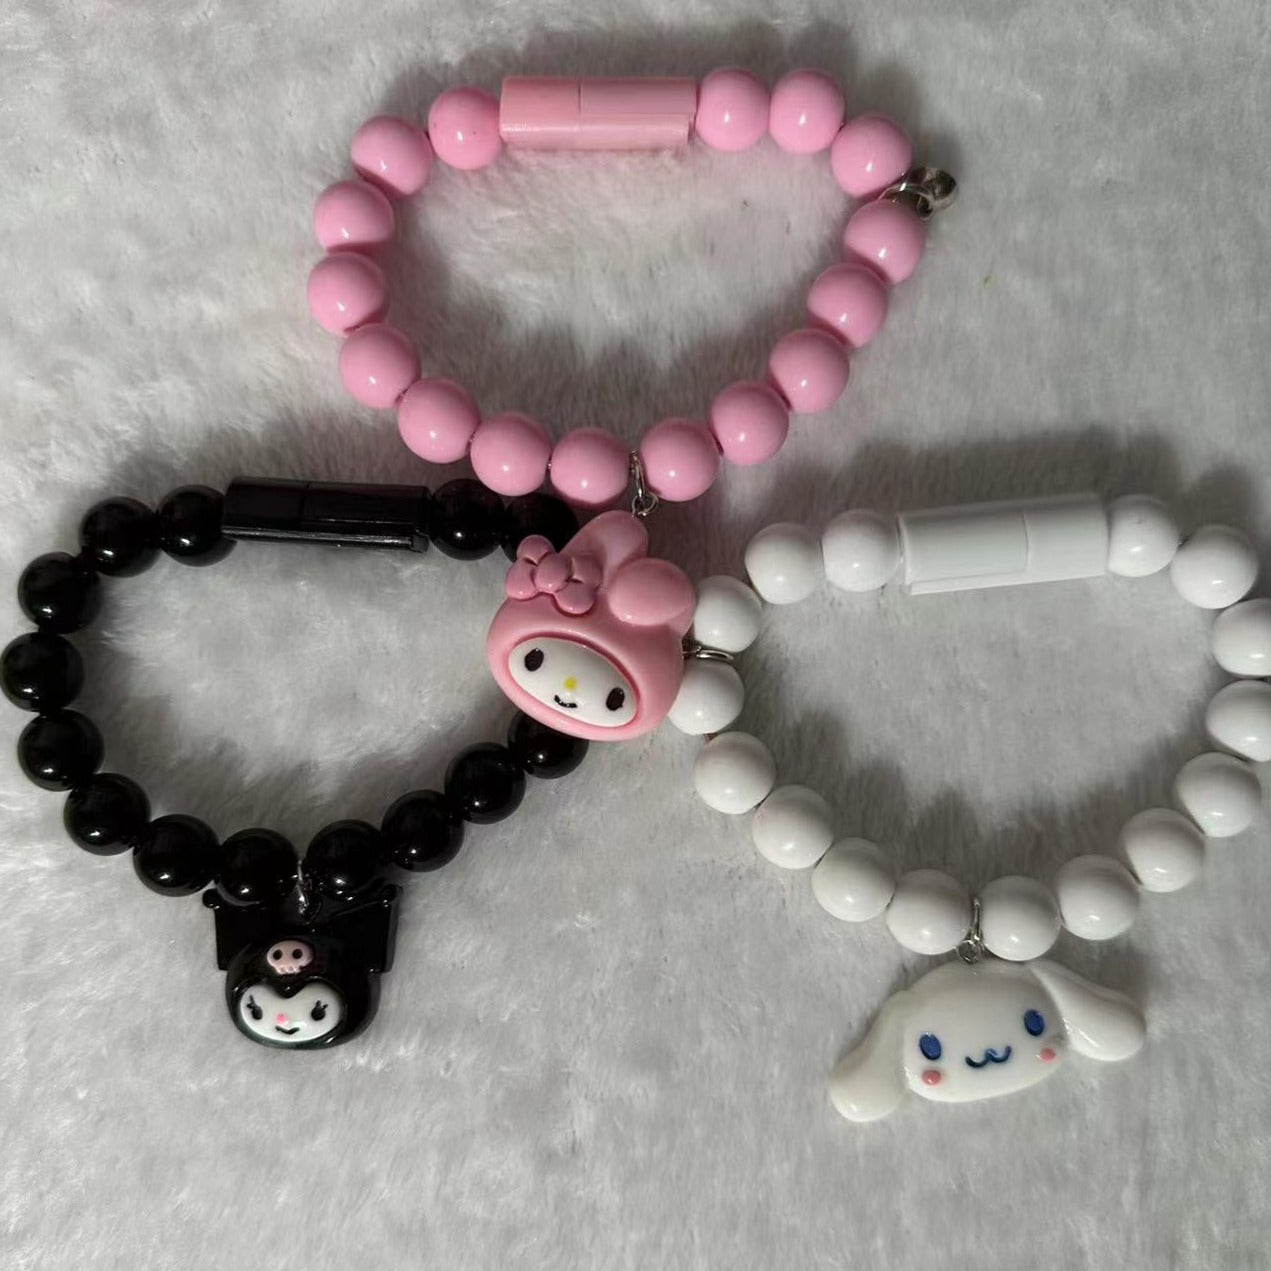 Sanrio Phone Charger Magnetic Bracelet Charger Cable Bracelet（ iPhone，Android，Type-C) - kikigoods